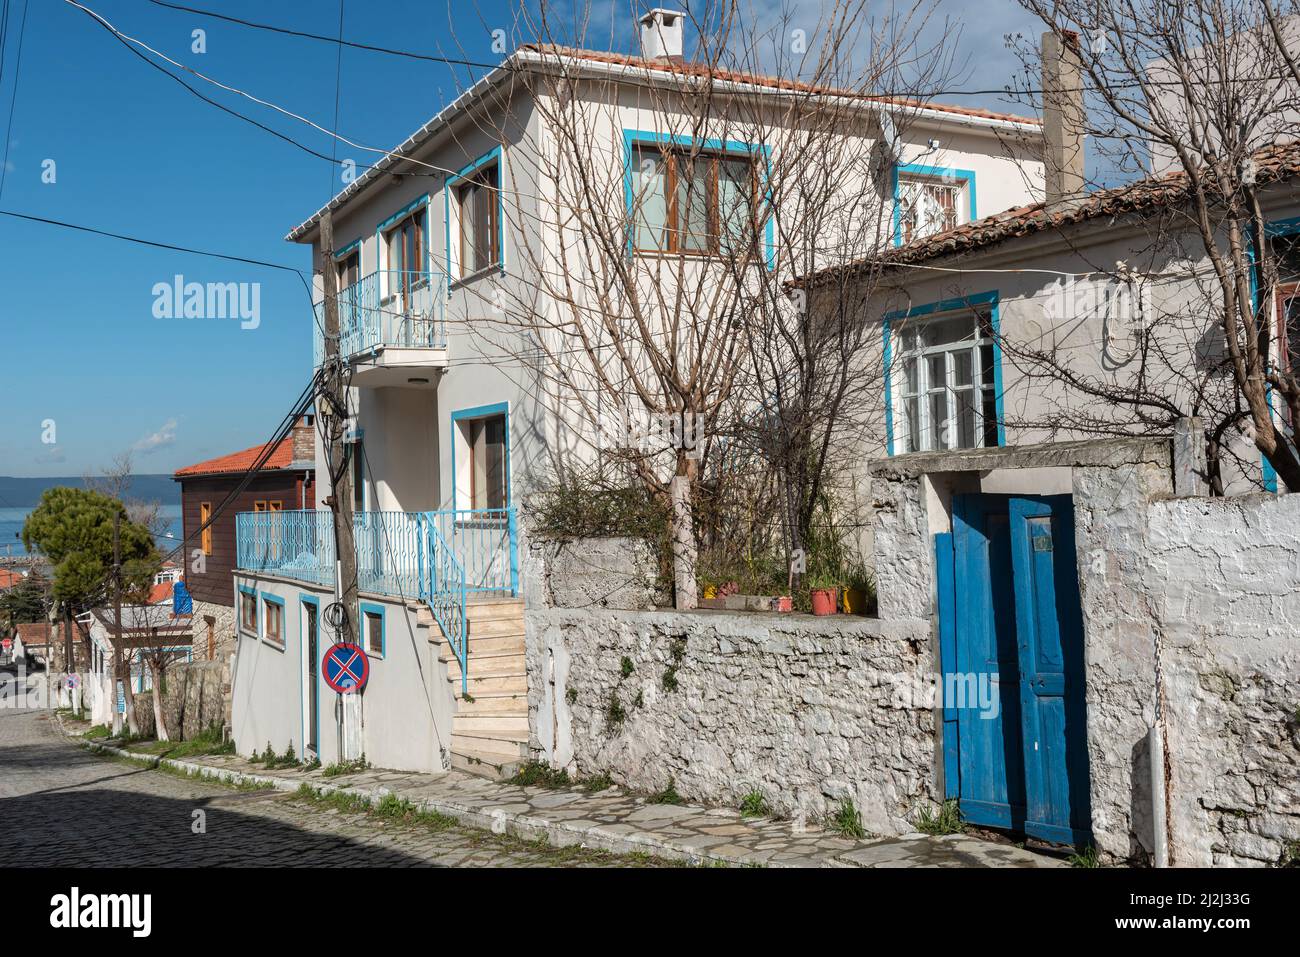 Canakkale, Turkey. February 18th 2022 Pretty blue painted houses in the village of Kilitbahir on the Gallipoli Peninsular overlooking the Dardanelles Stock Photo